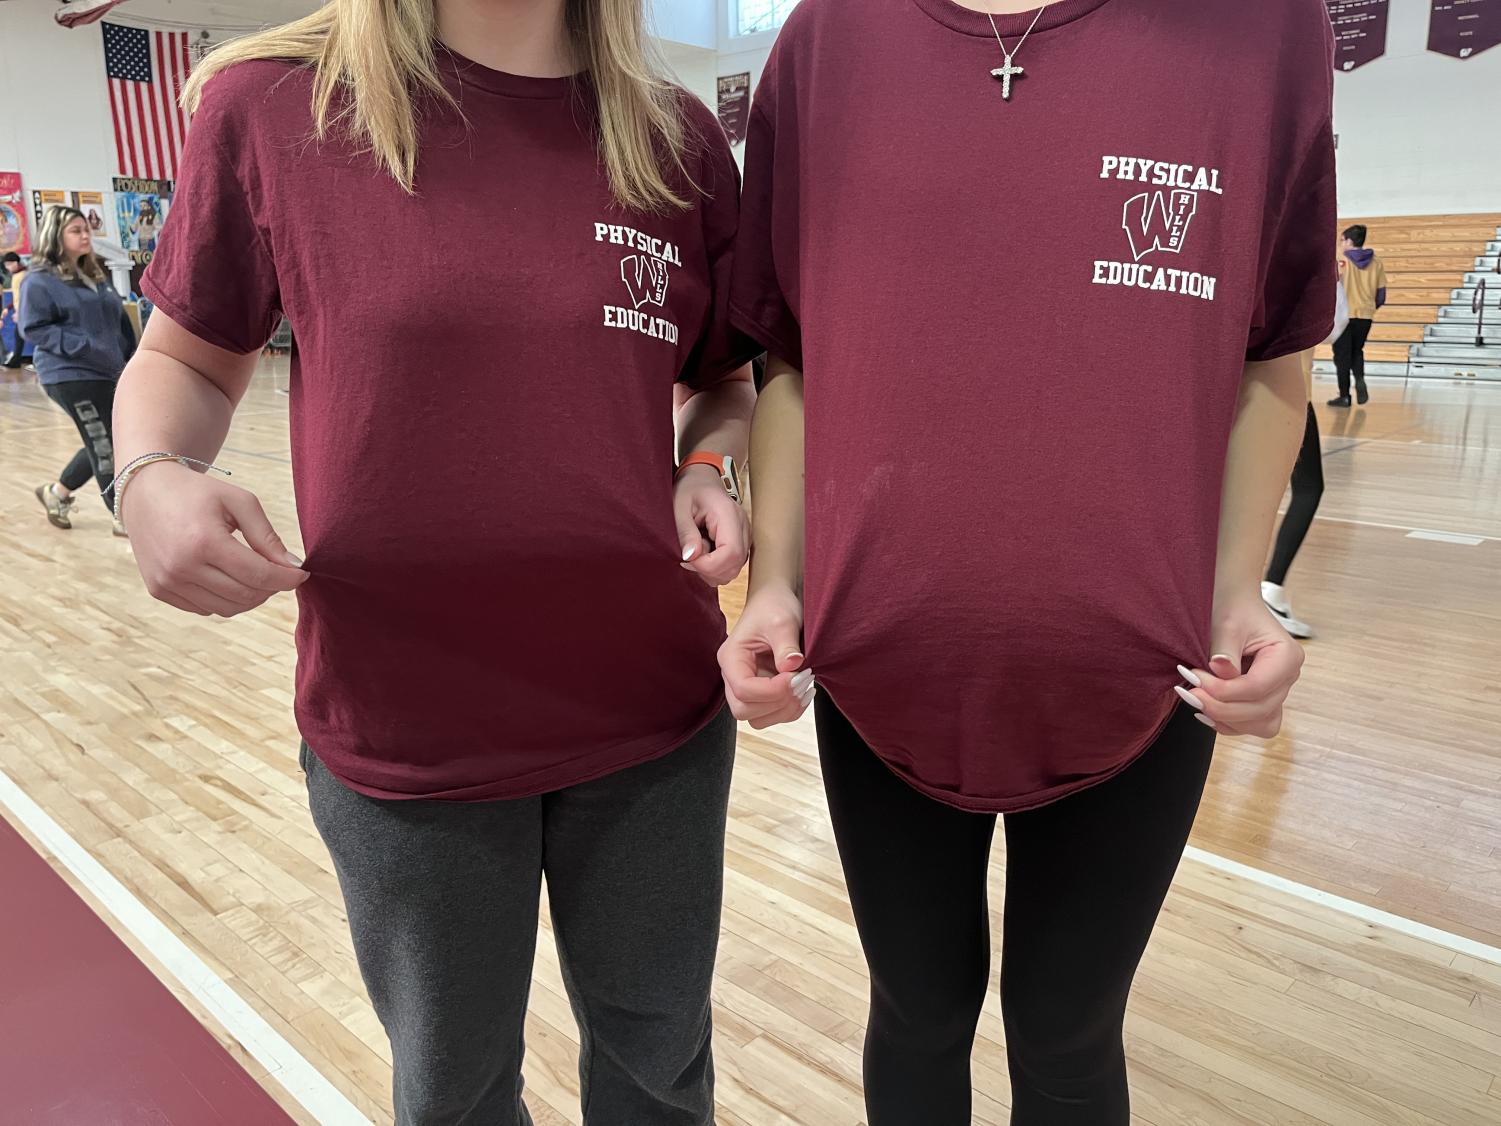 Gym uniforms policy still causes controversy among students – BSHS PawPrint